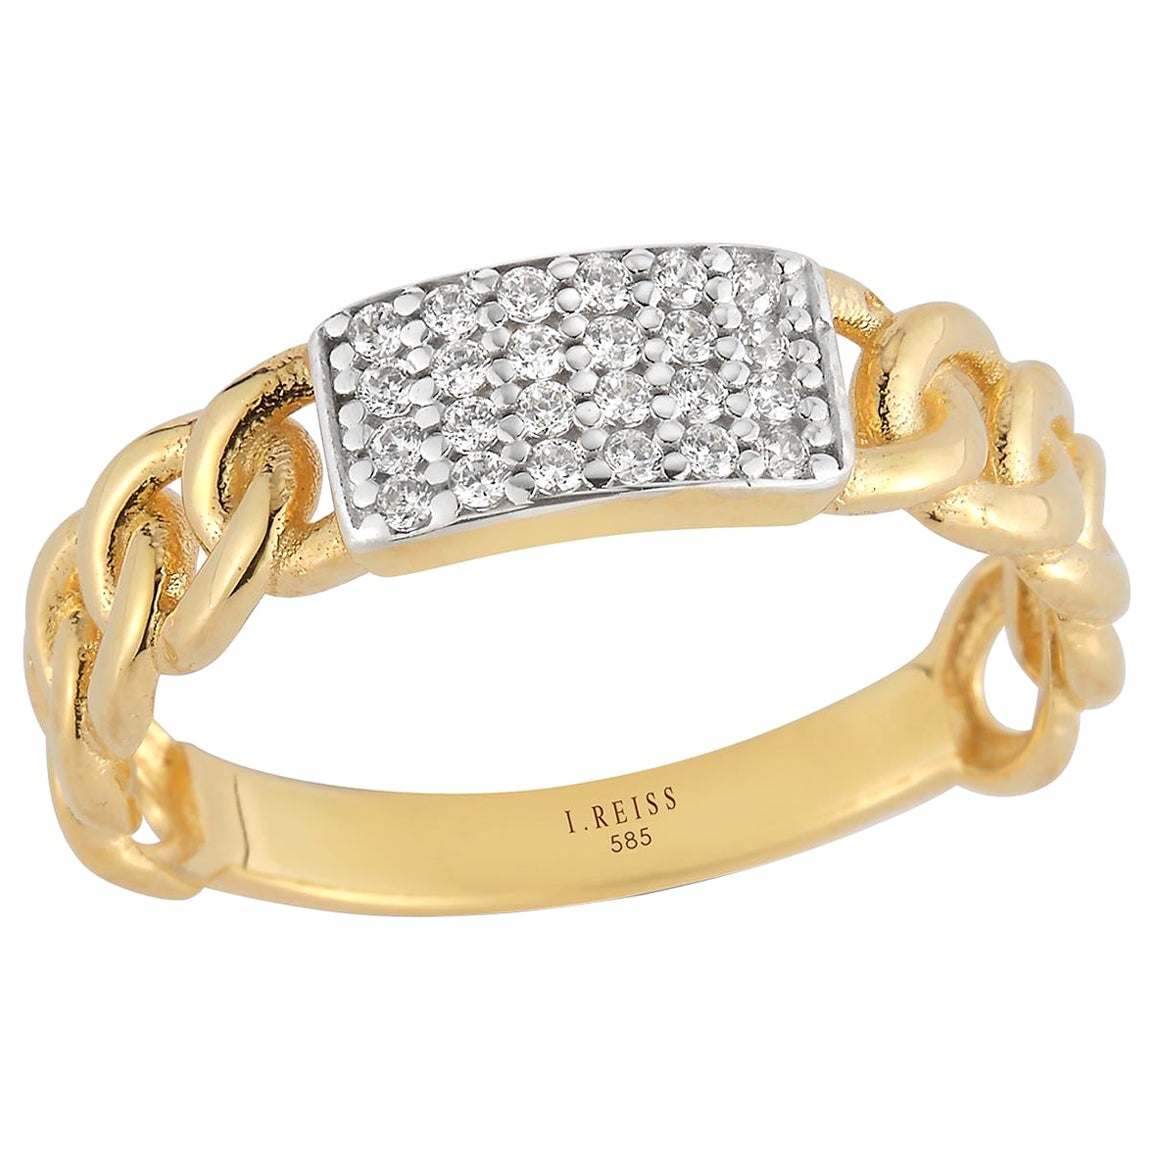 For Sale:  Handcrafted 14k Yellow Gold 0.14cttw Braided ID Ring